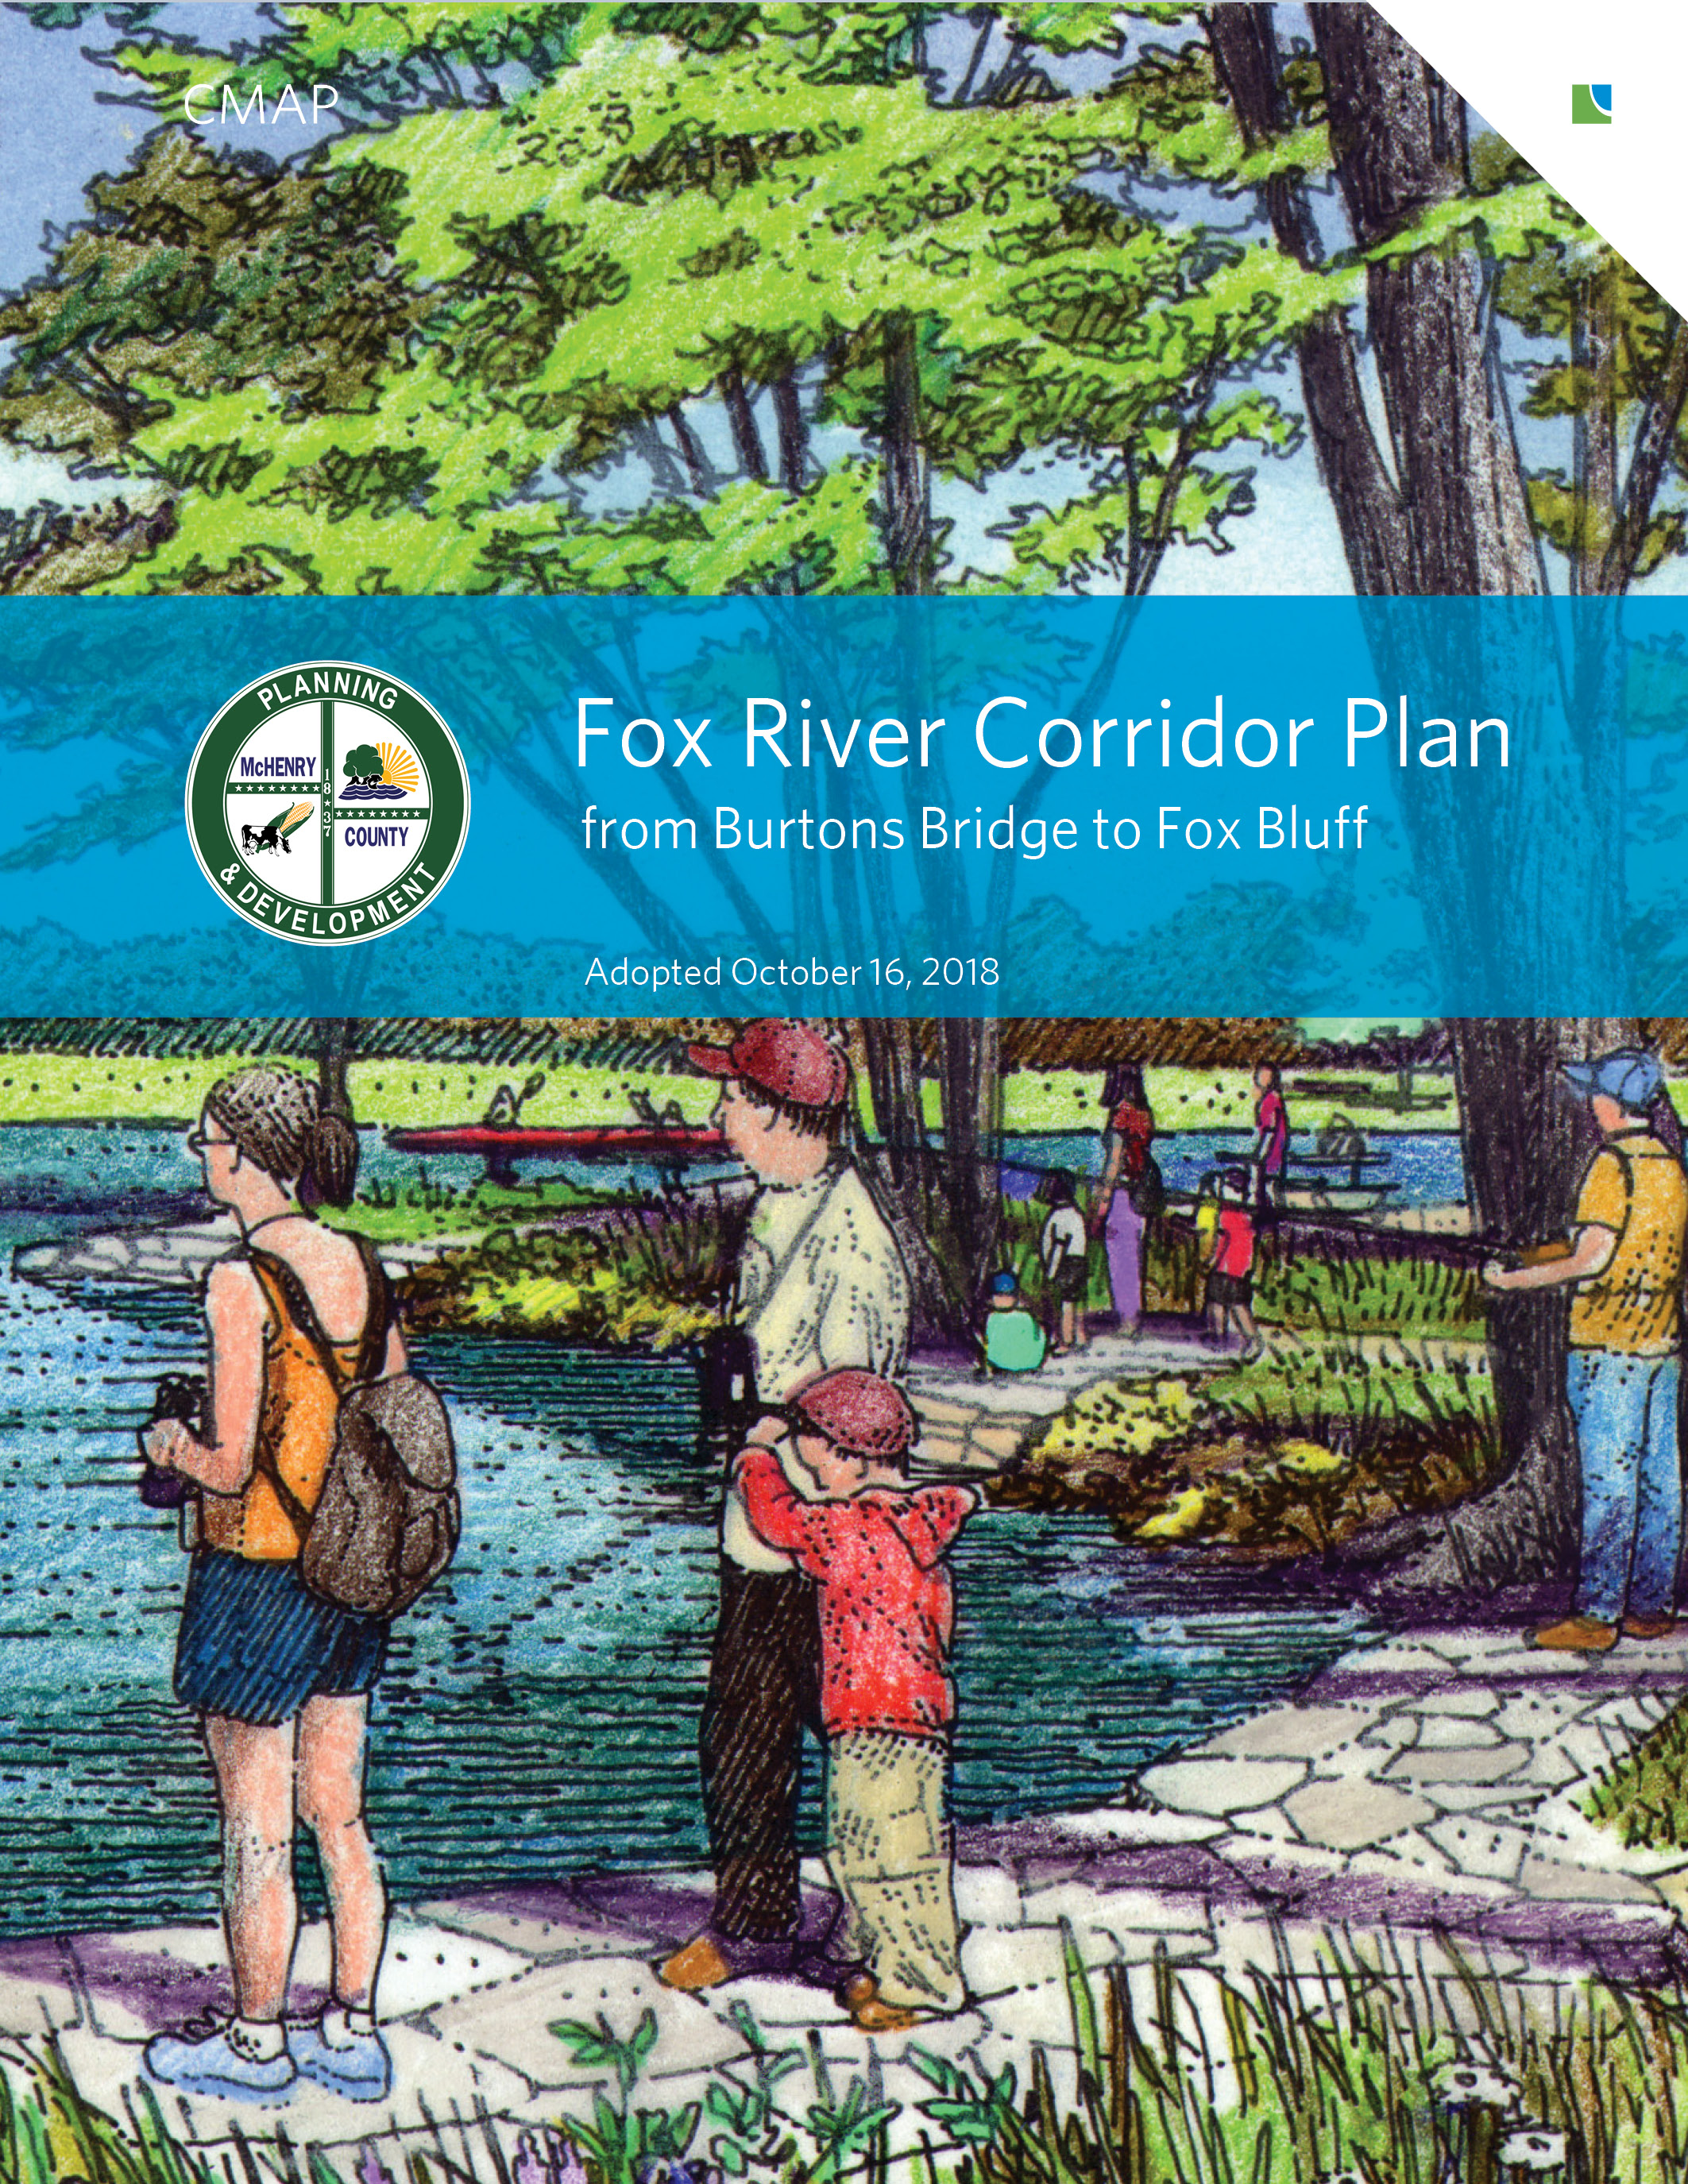 Cover page of the Fox River Corridor Plan from Burtons Bridge to Fox Bluff